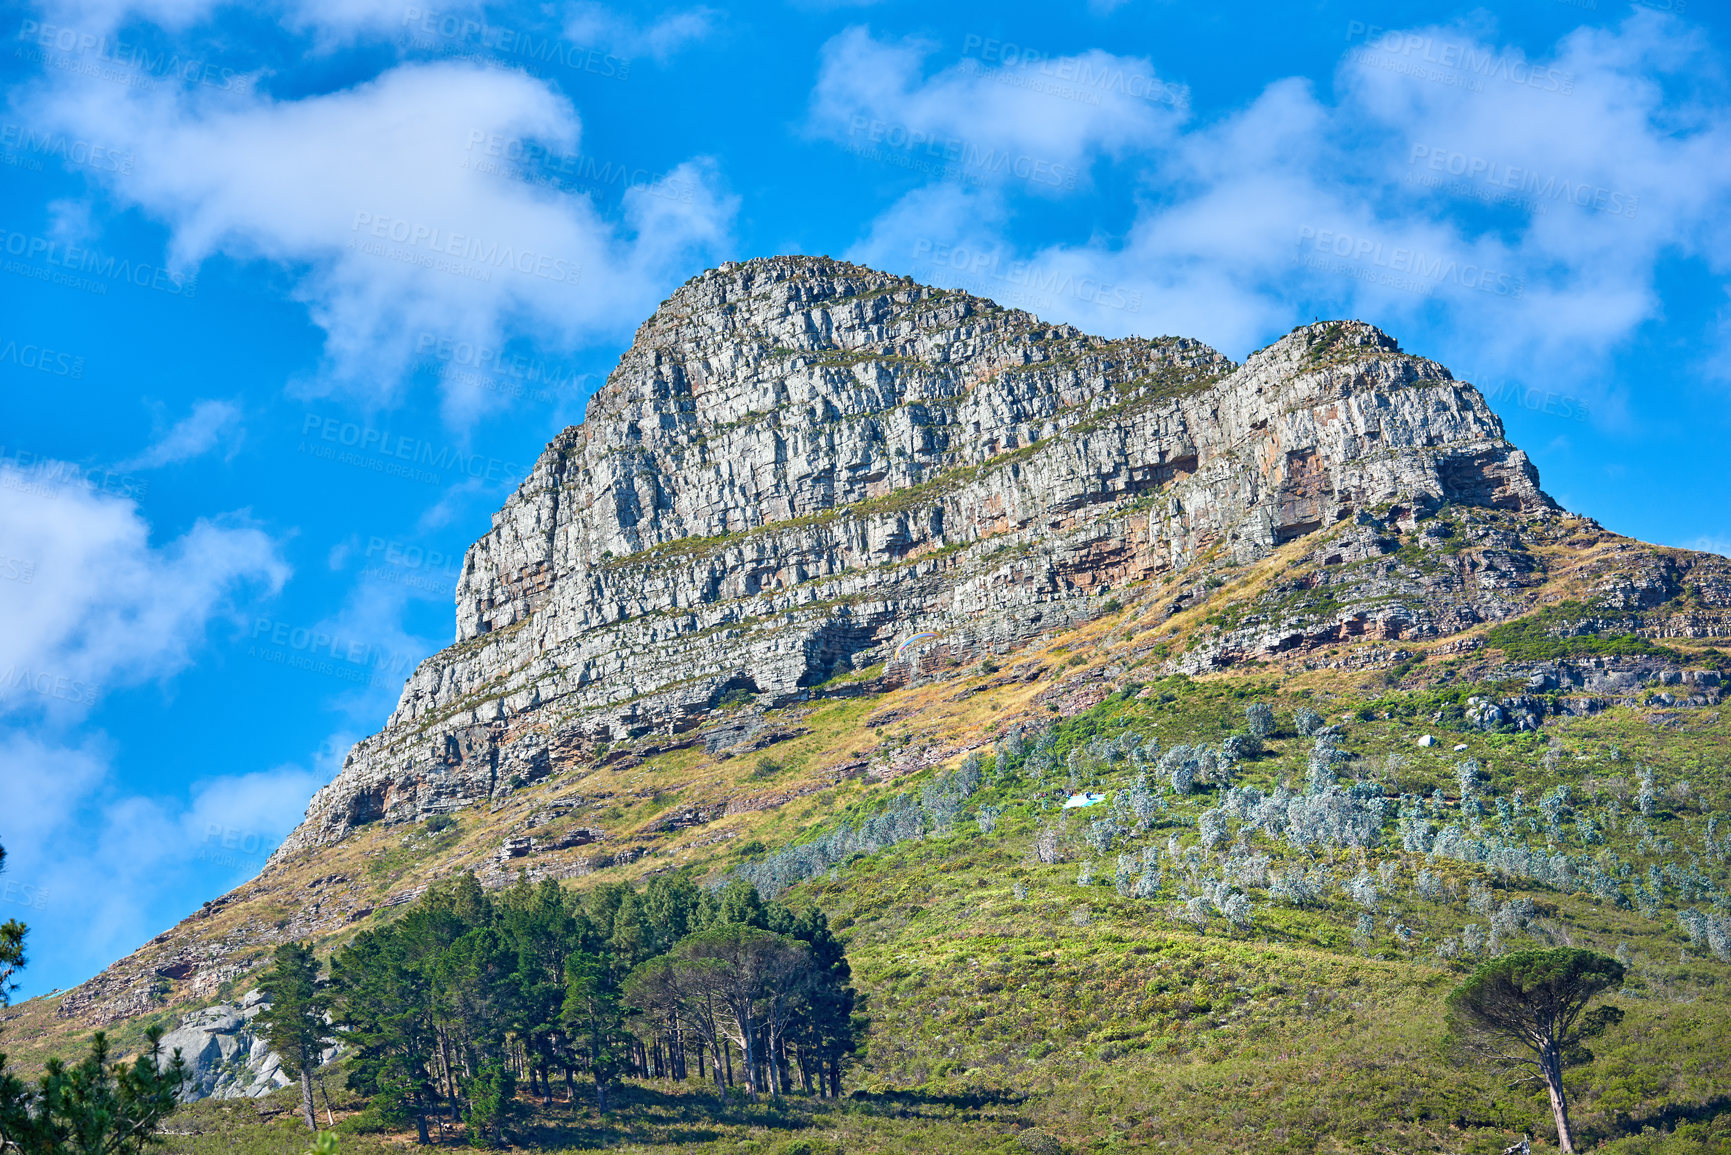 Buy stock photo Landscape of a mountain on cloudy blue sky with copy space. Beautiful nature view of Lions Head mountains peak with lush green trees and bushes in a popular hiking location in Cape Town, South Africa